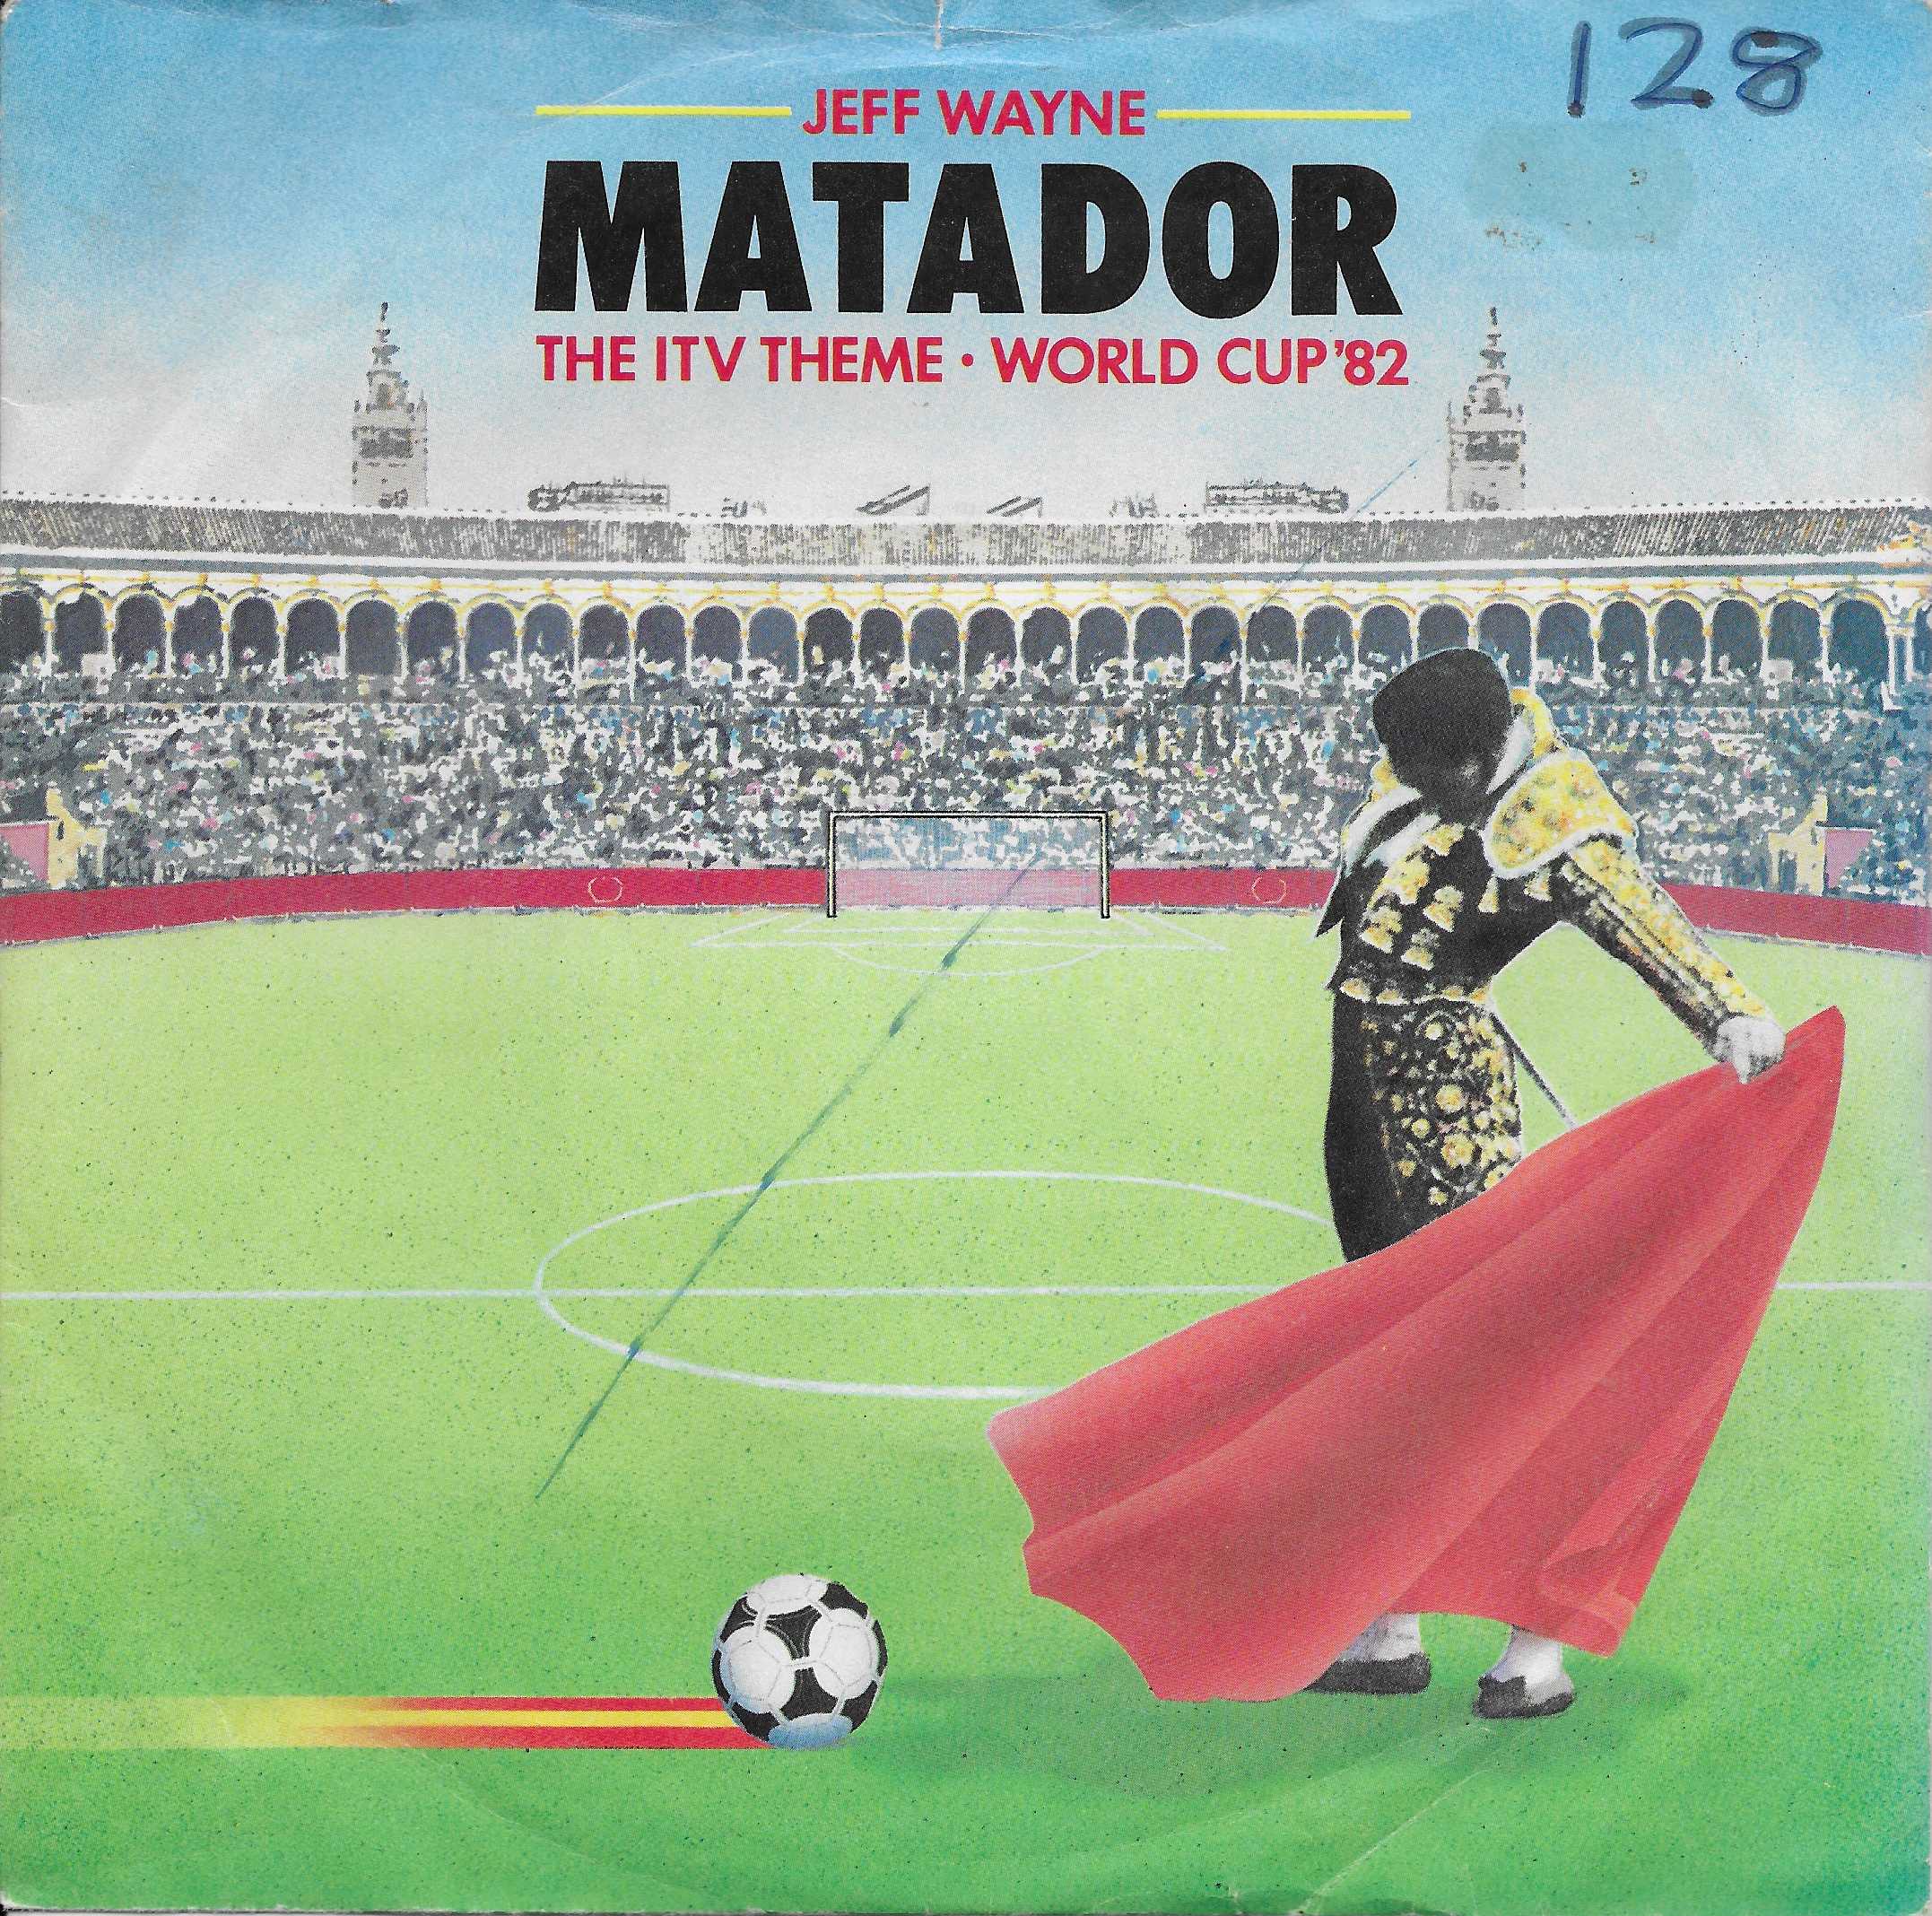 Picture of Matador (ITV World Cup theme (1982)) by artist Jeff Wayne from ITV, Channel 4 and Channel 5 singles library